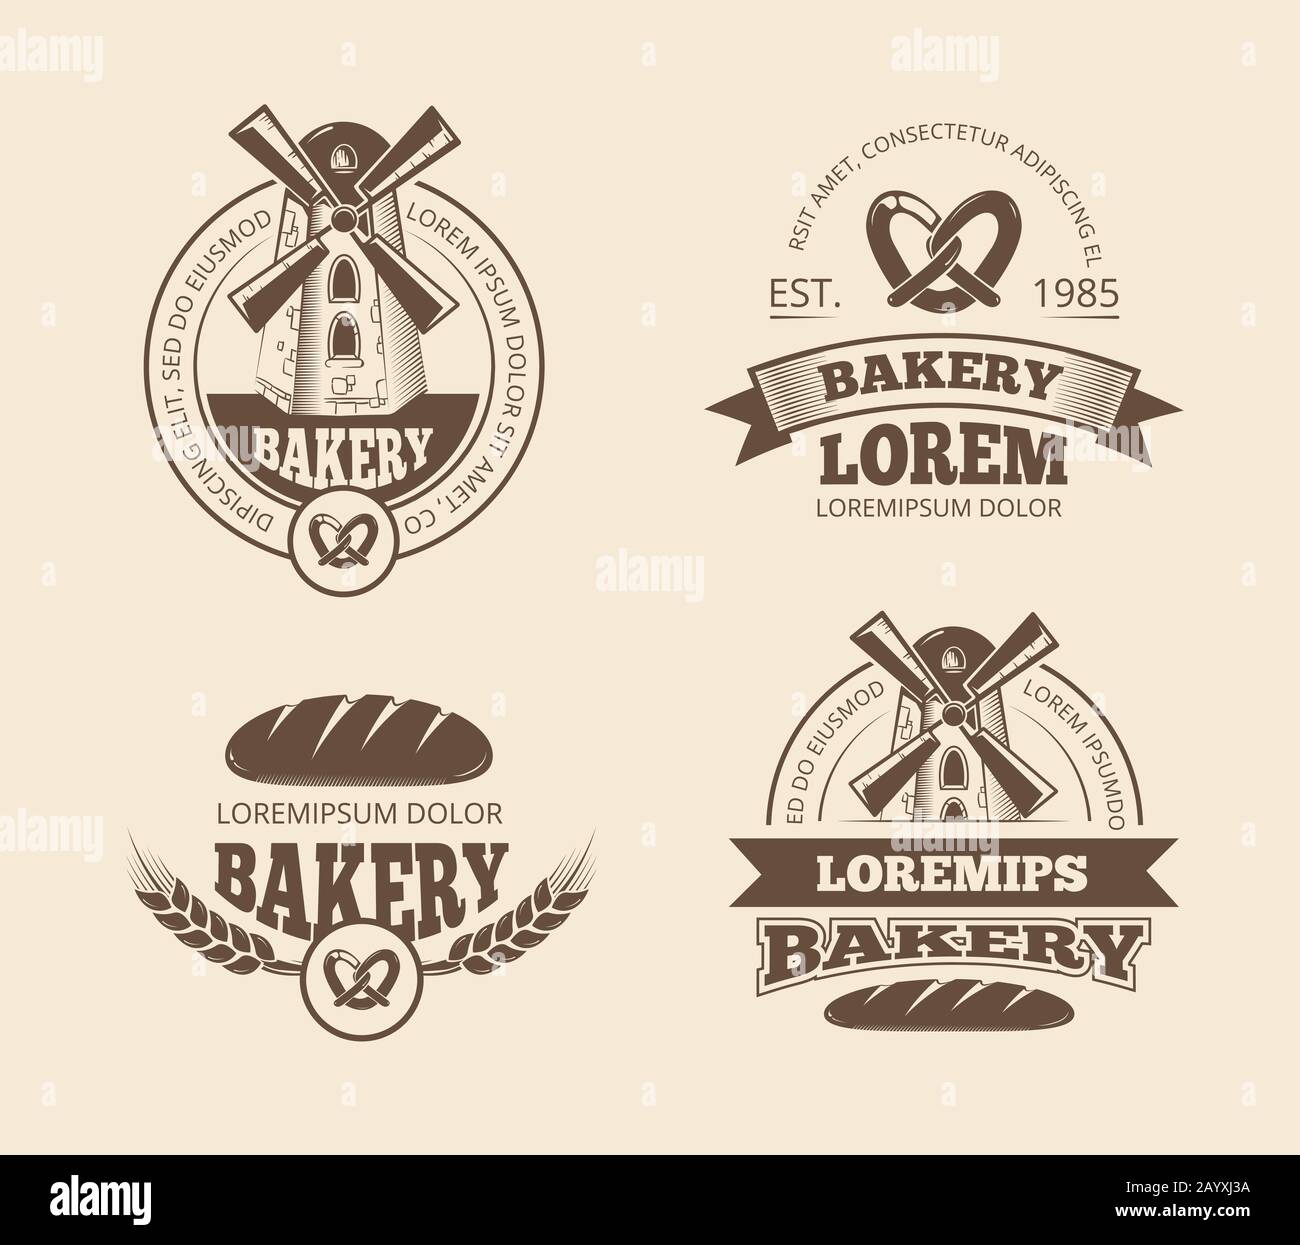 https://c8.alamy.com/comp/2AYXJ3A/retro-bread-bakery-old-style-logos-labels-badges-emblems-badge-and-sticker-for-bakery-bread-product-bread-label-illustration-2AYXJ3A.jpg